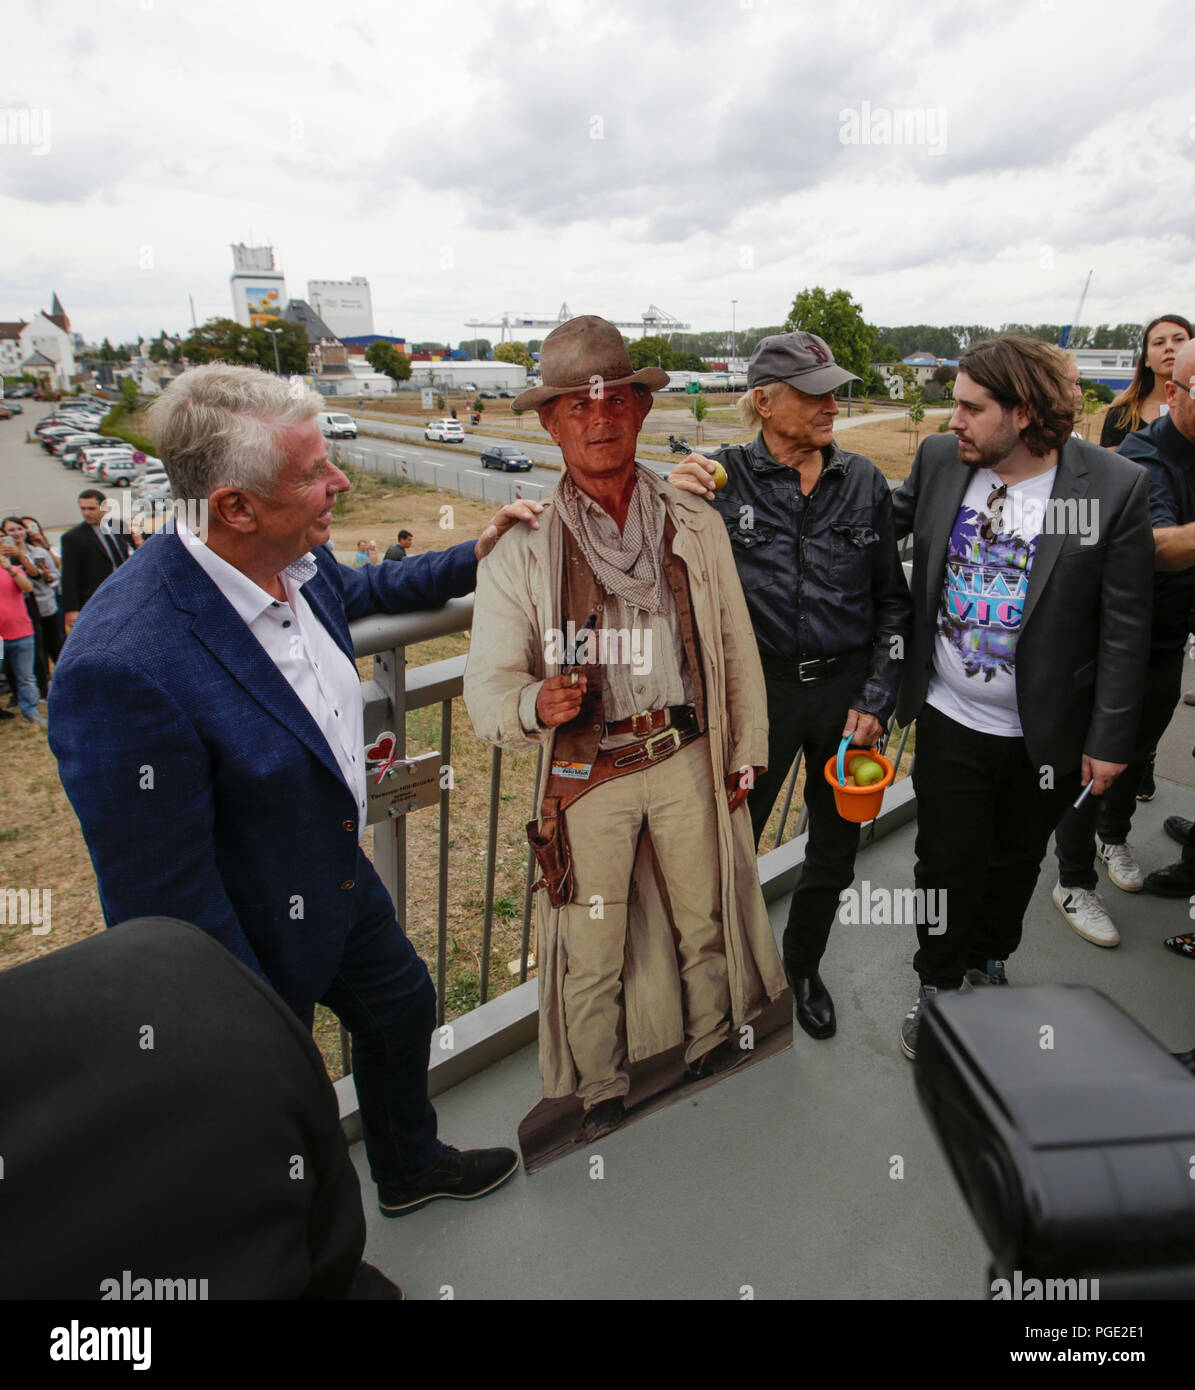 Worms, Germany. 24th Aug, 2018. Actor Peter Englert, who initiated the renaming of the bridge to Terence-Hill-Bridge, Terence Hill and the Lord Mayor of Worms Michael Kissel pose from left to right with a cardboard cut-out of Terence Hill. Italian actor Terence Hill visited the German city of Worms, to present his new movie (My Name is somebody). Terence Hill added the stop in Worms to his movie promotion tour in Germany, to visit a pedestrian bridge, that is unofficially named Terence-Hill-Bridge (officially Karl-Kubel-Bridge). Credit: Michael Debets/Pacific Press/Alamy Live News Stock Photo